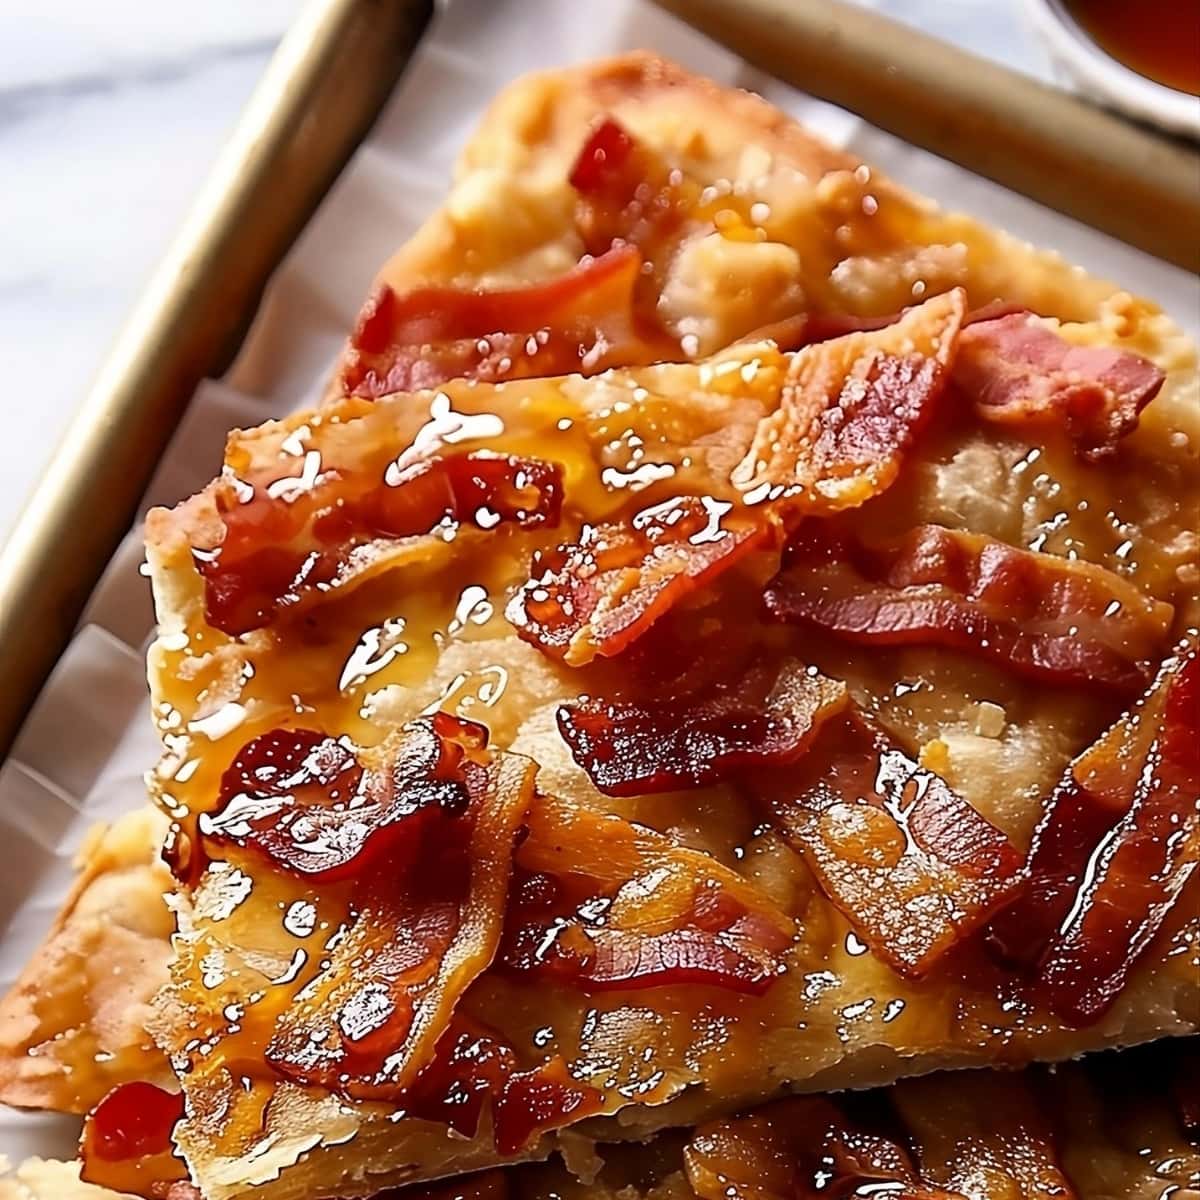 Sliced maple bacon crack in a baking sheet drizzled with maple syrup.